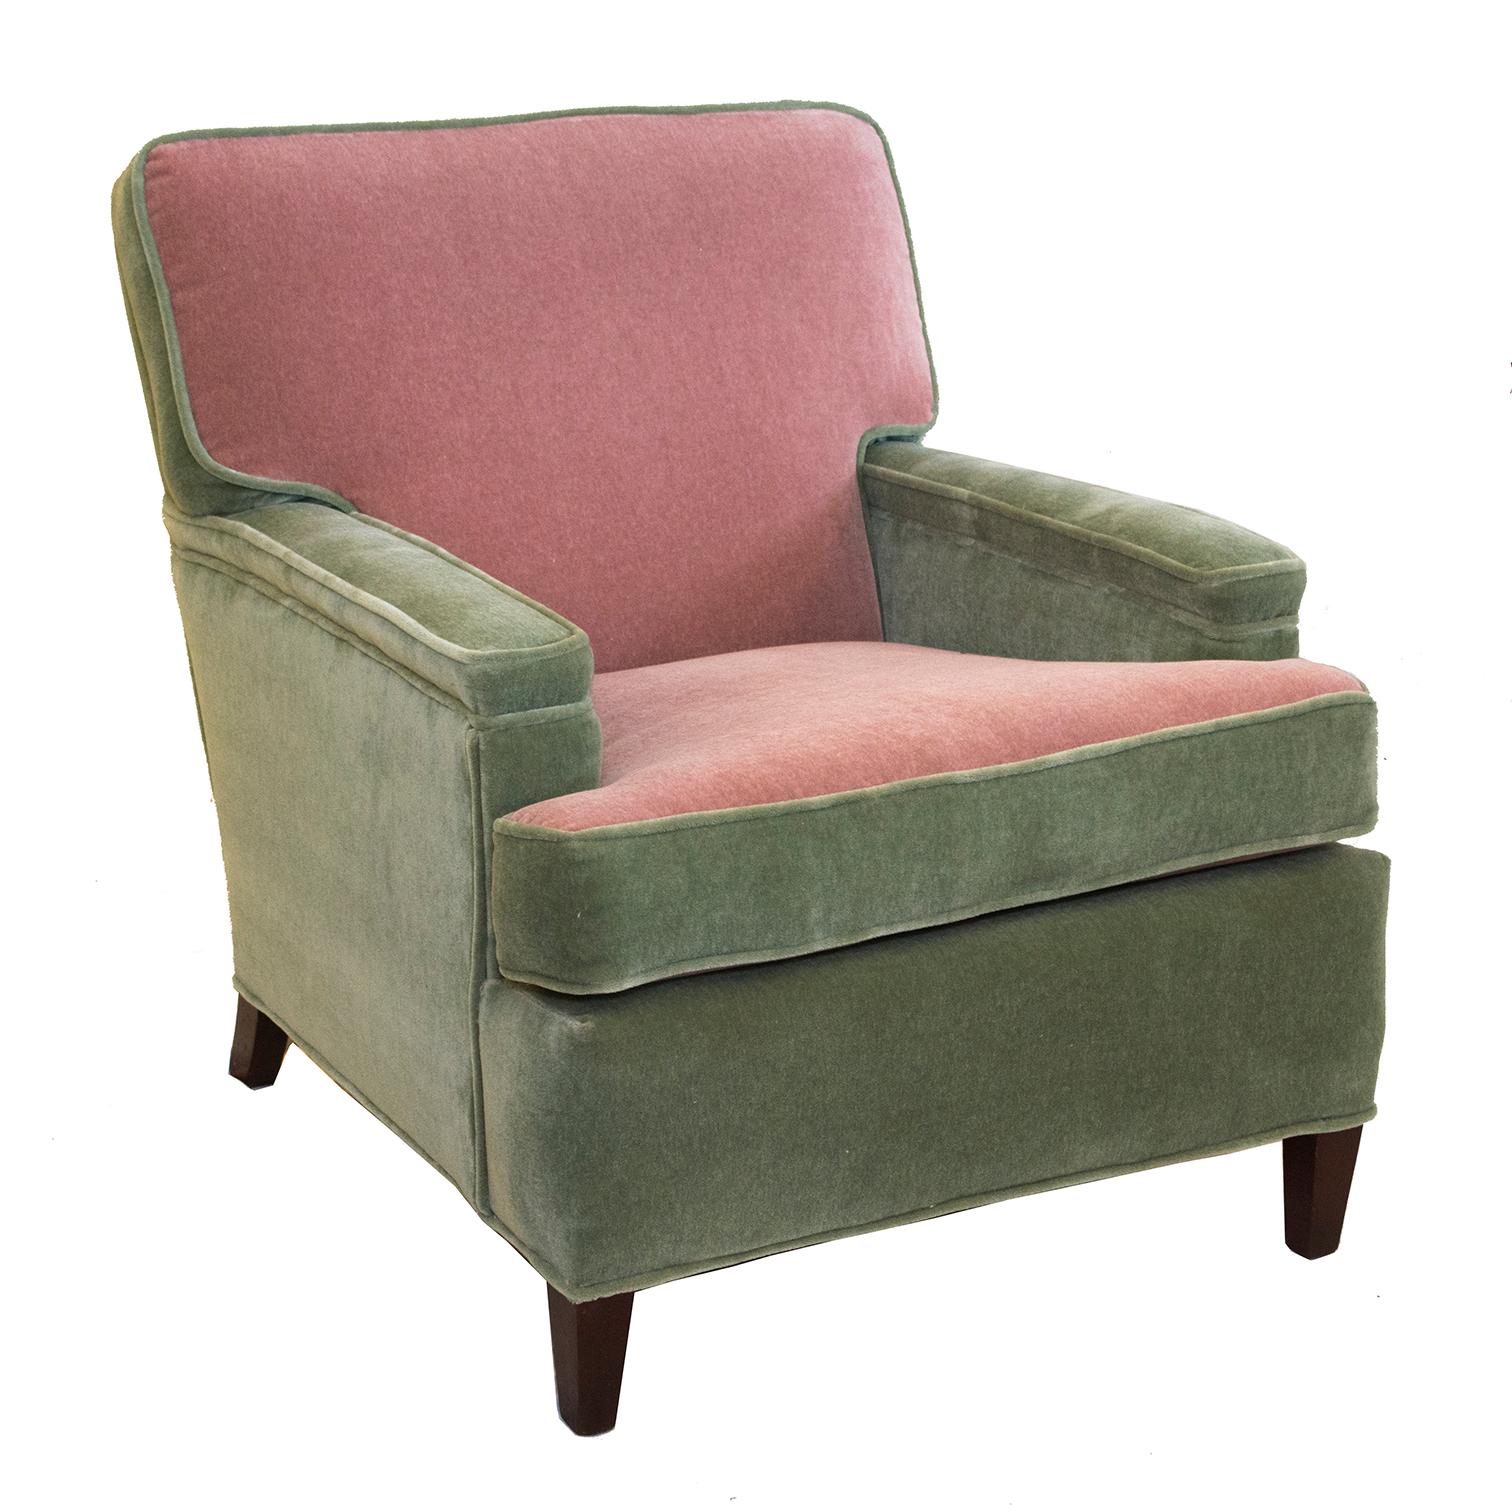 This pair of gorgeous Art Deco Lawson-back club chairs were just reupholstered in our Connecticut workroom in muted-to-perfection green mohair with a pop of light pink mohair on the cushions. These colors ruled the early 1950s - completely classic.